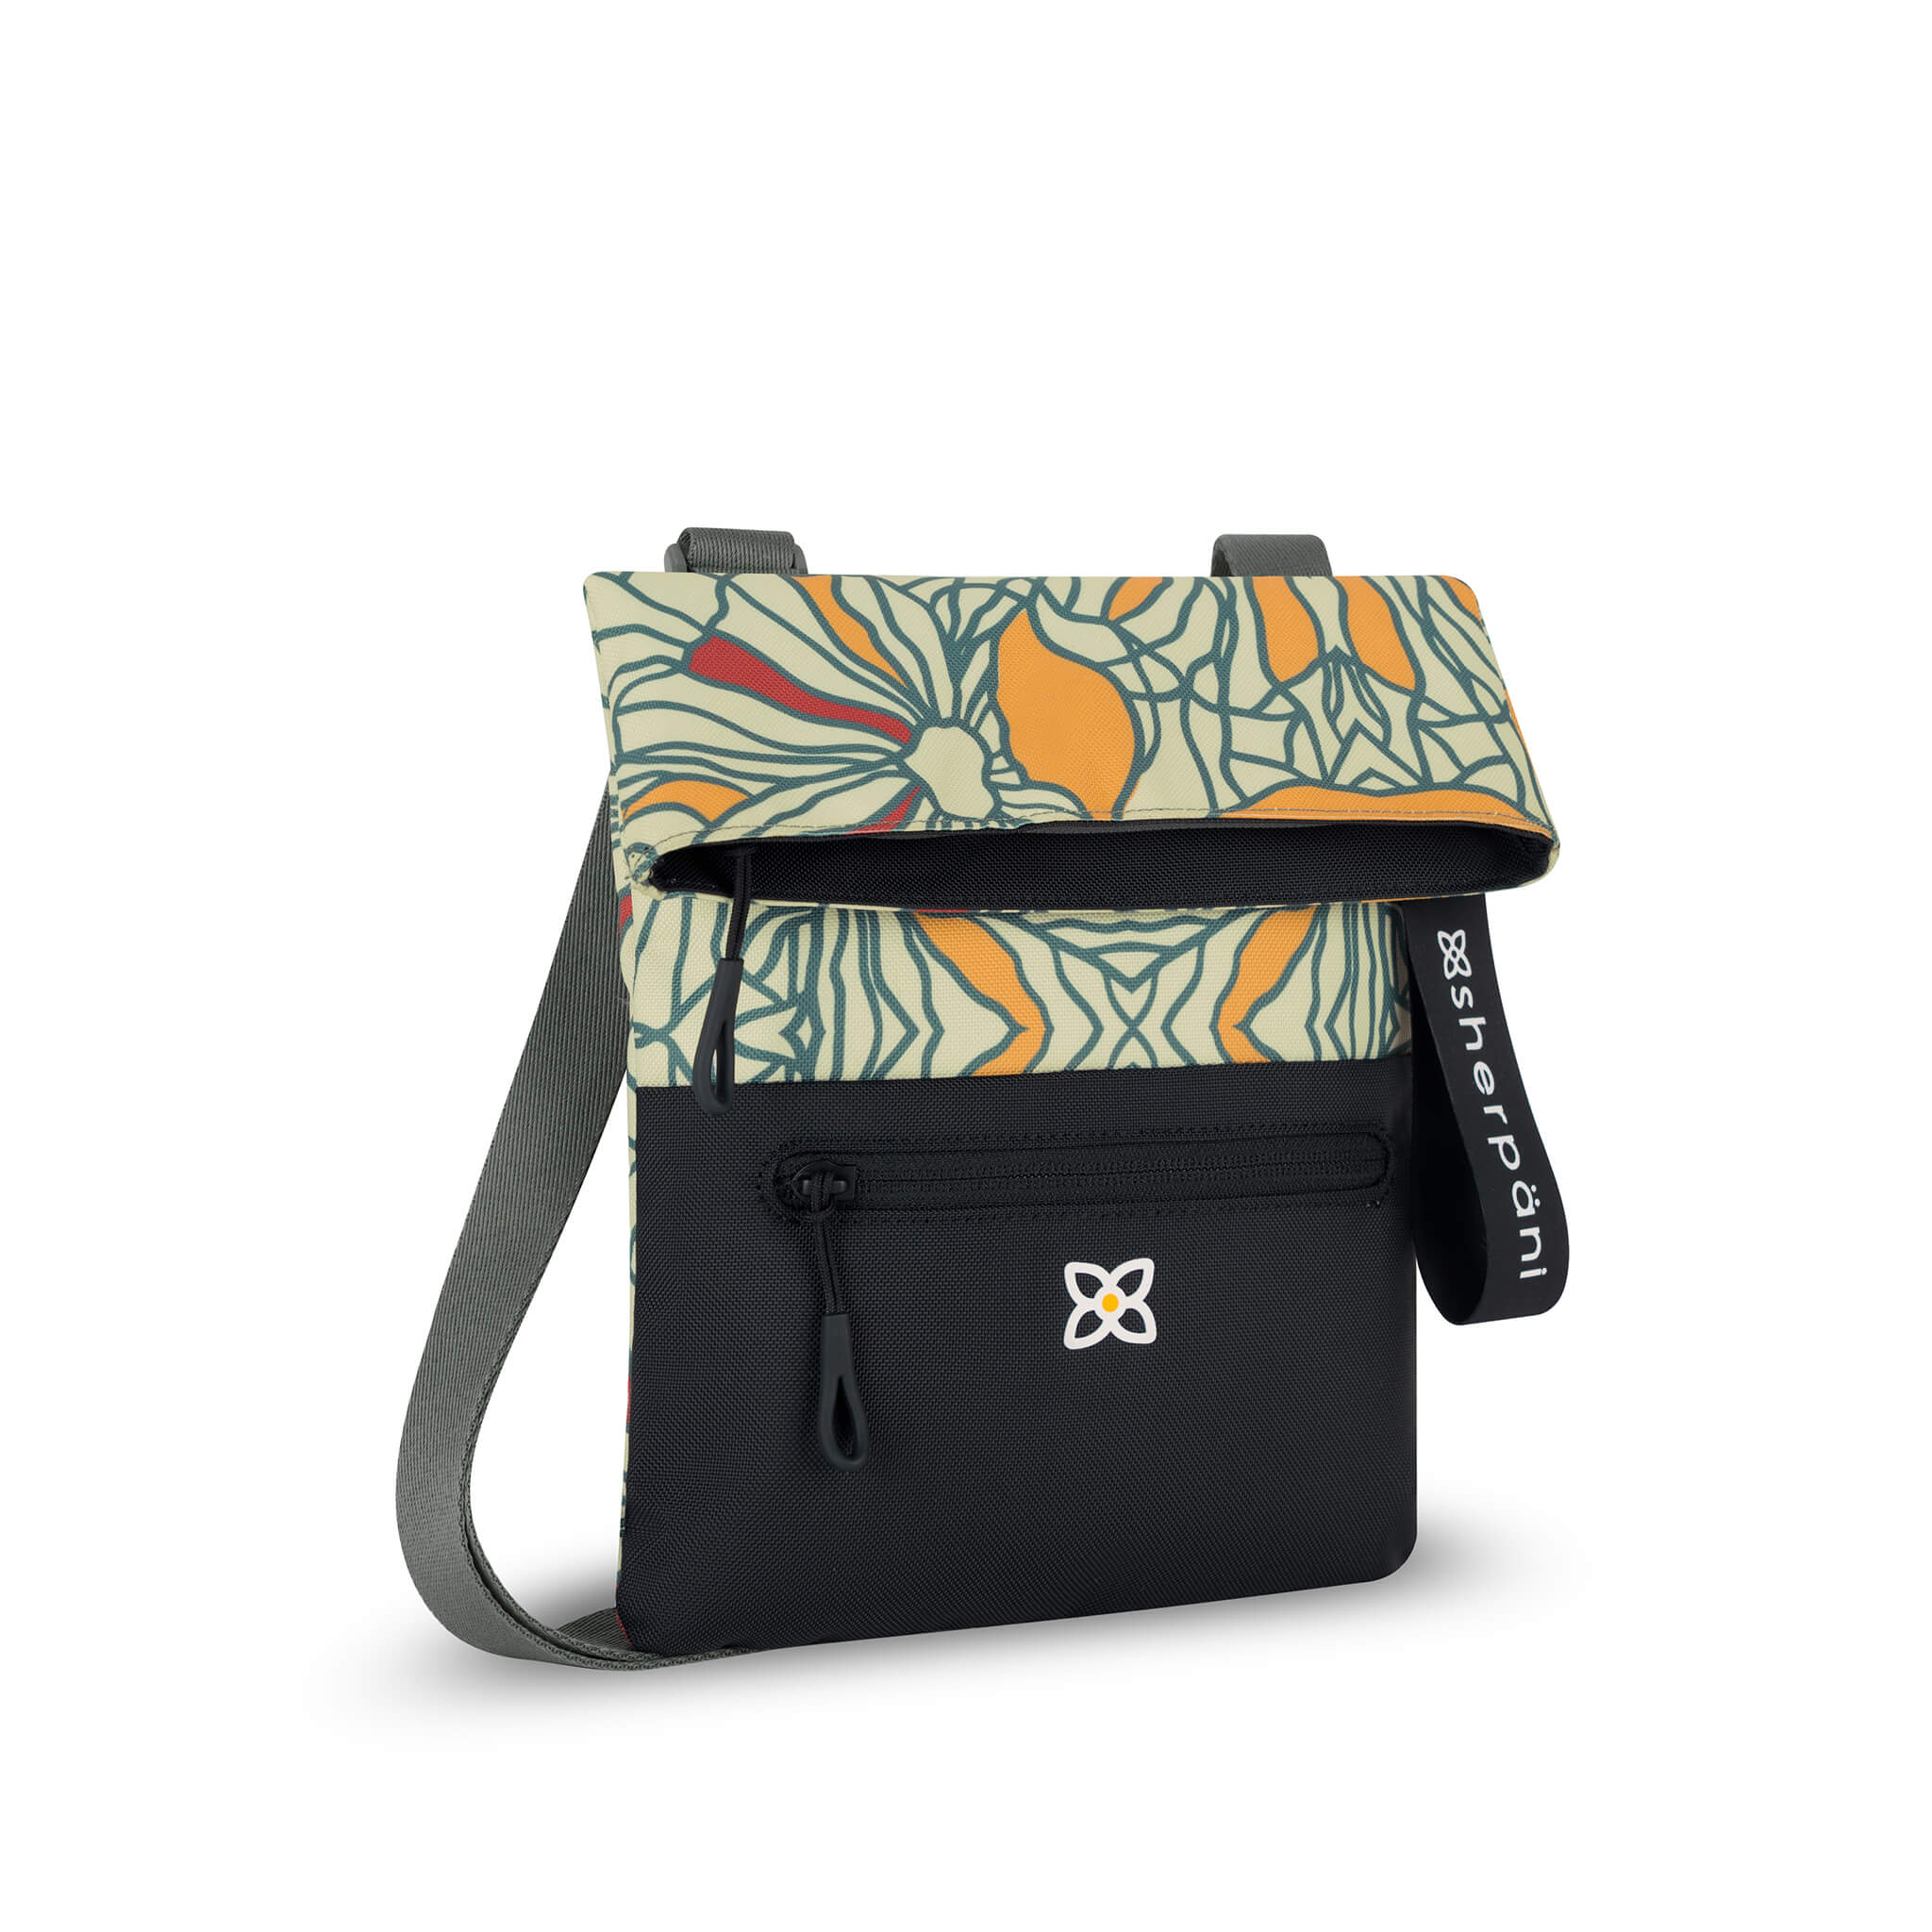 Angled front view of Sherpani fold over crossbody bag, the Pica in Fiori. Pica features include an adjustable crossbody strap, outside zipper pocket, back flap pocket, inside zipper pocket and slip pocket, detachable keychain and RFID protection. The Fiori colorway is two-toned in black and a floral pattern with red accents. #color_fiori